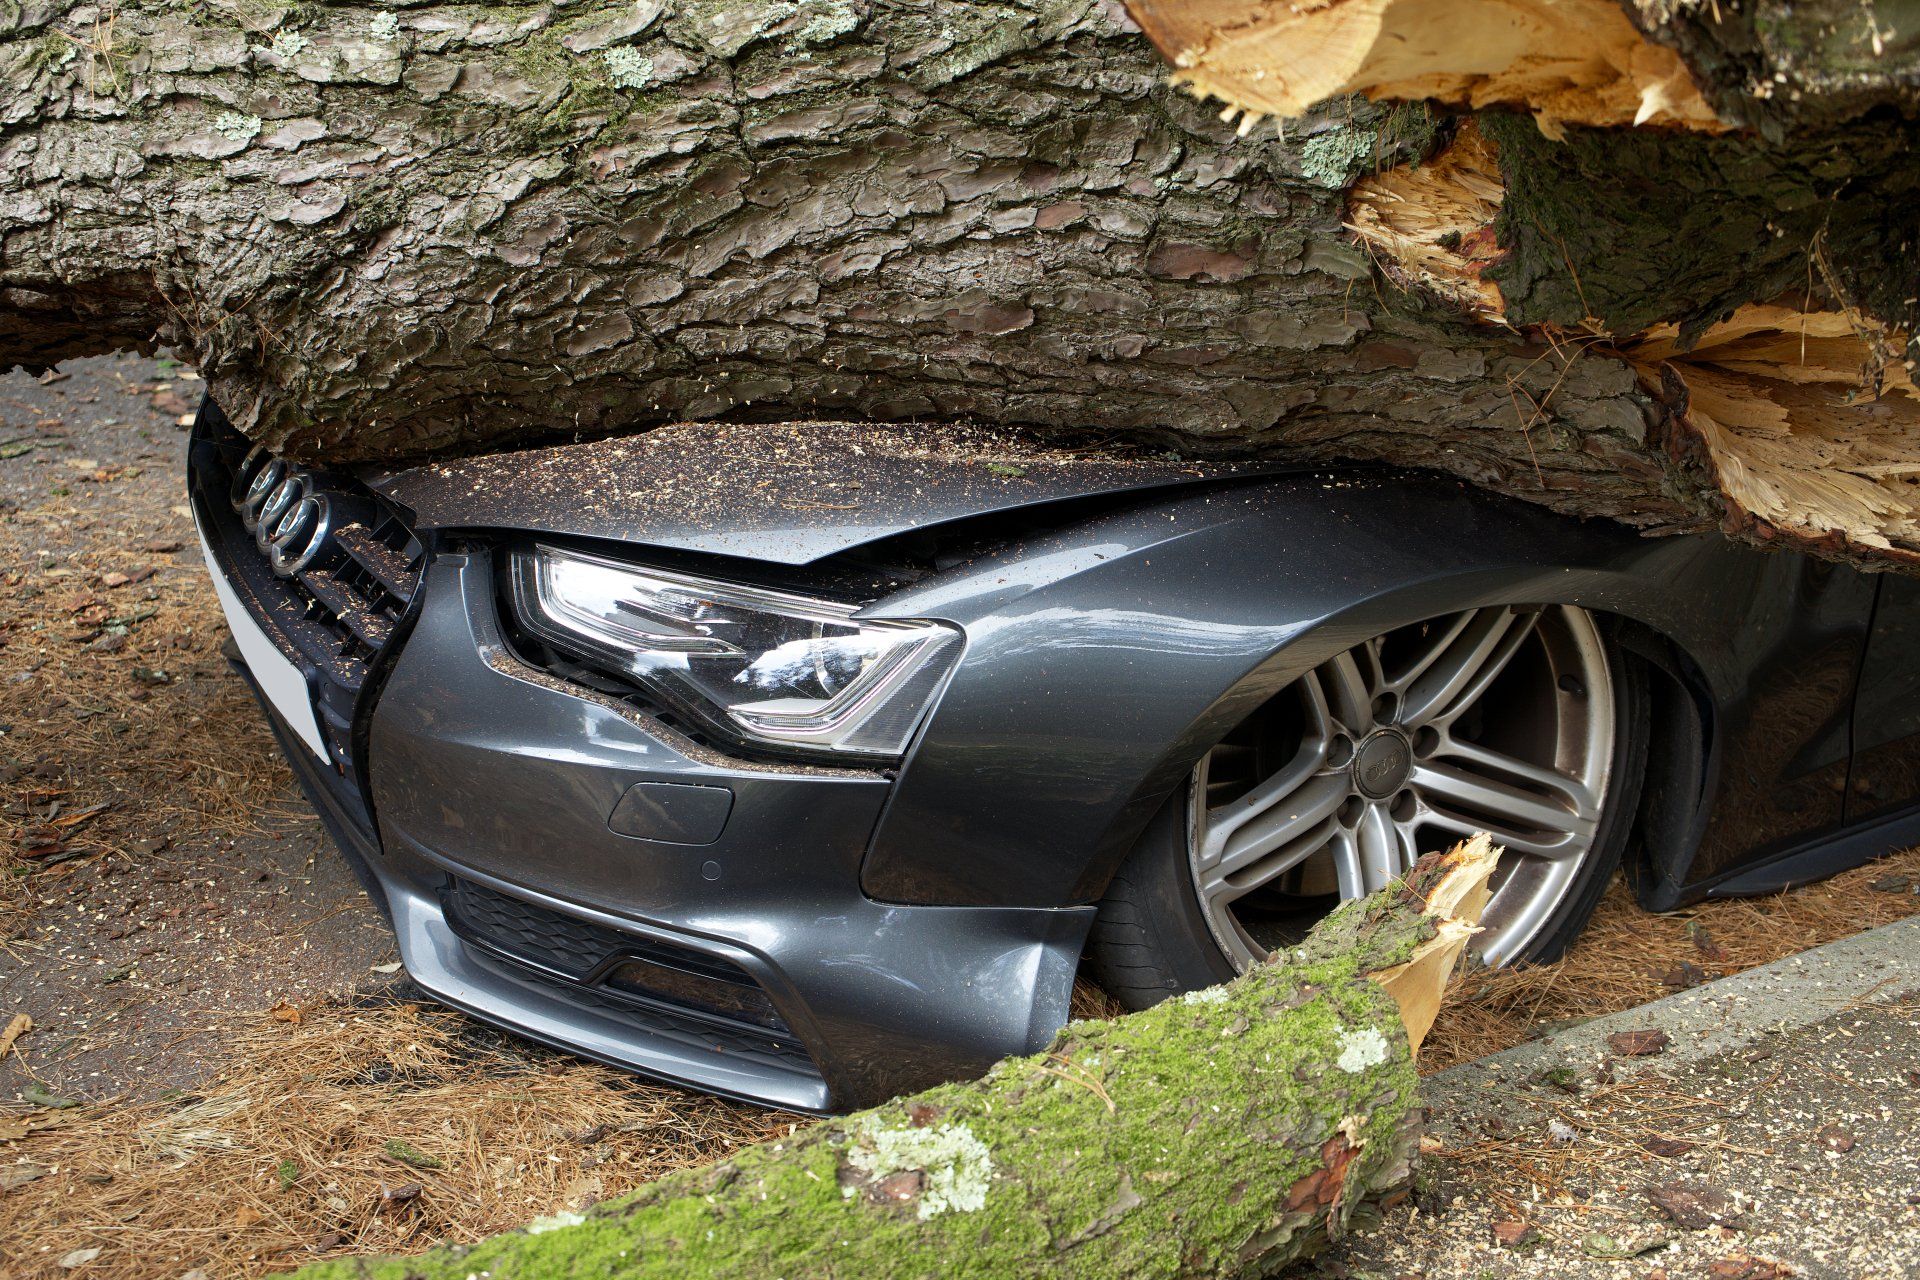 A newer grey car squashed under a tree branch, laying over the car's hood